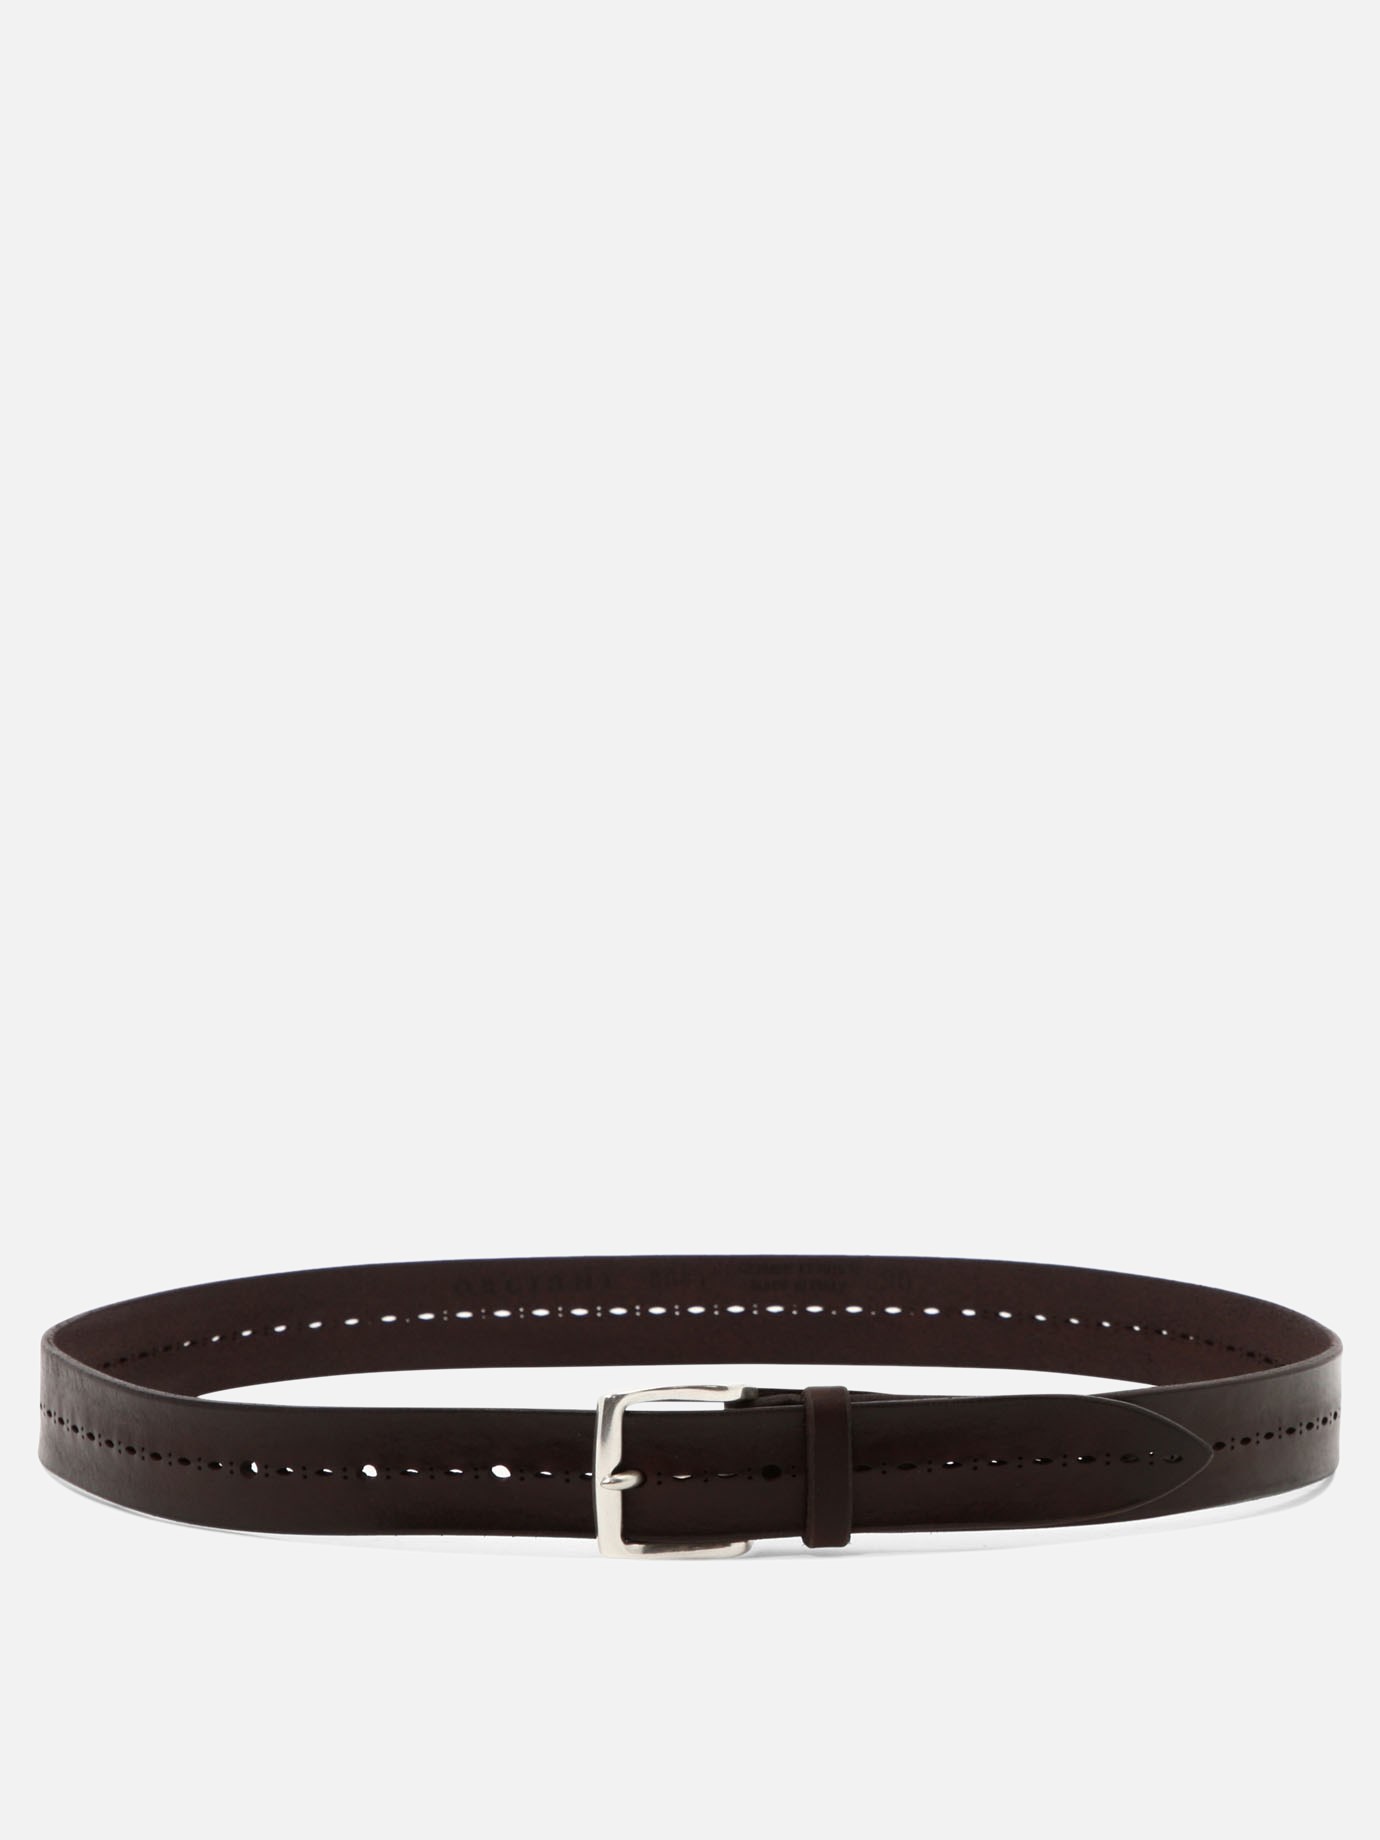  Bull Soft  beltby Orciani - 3